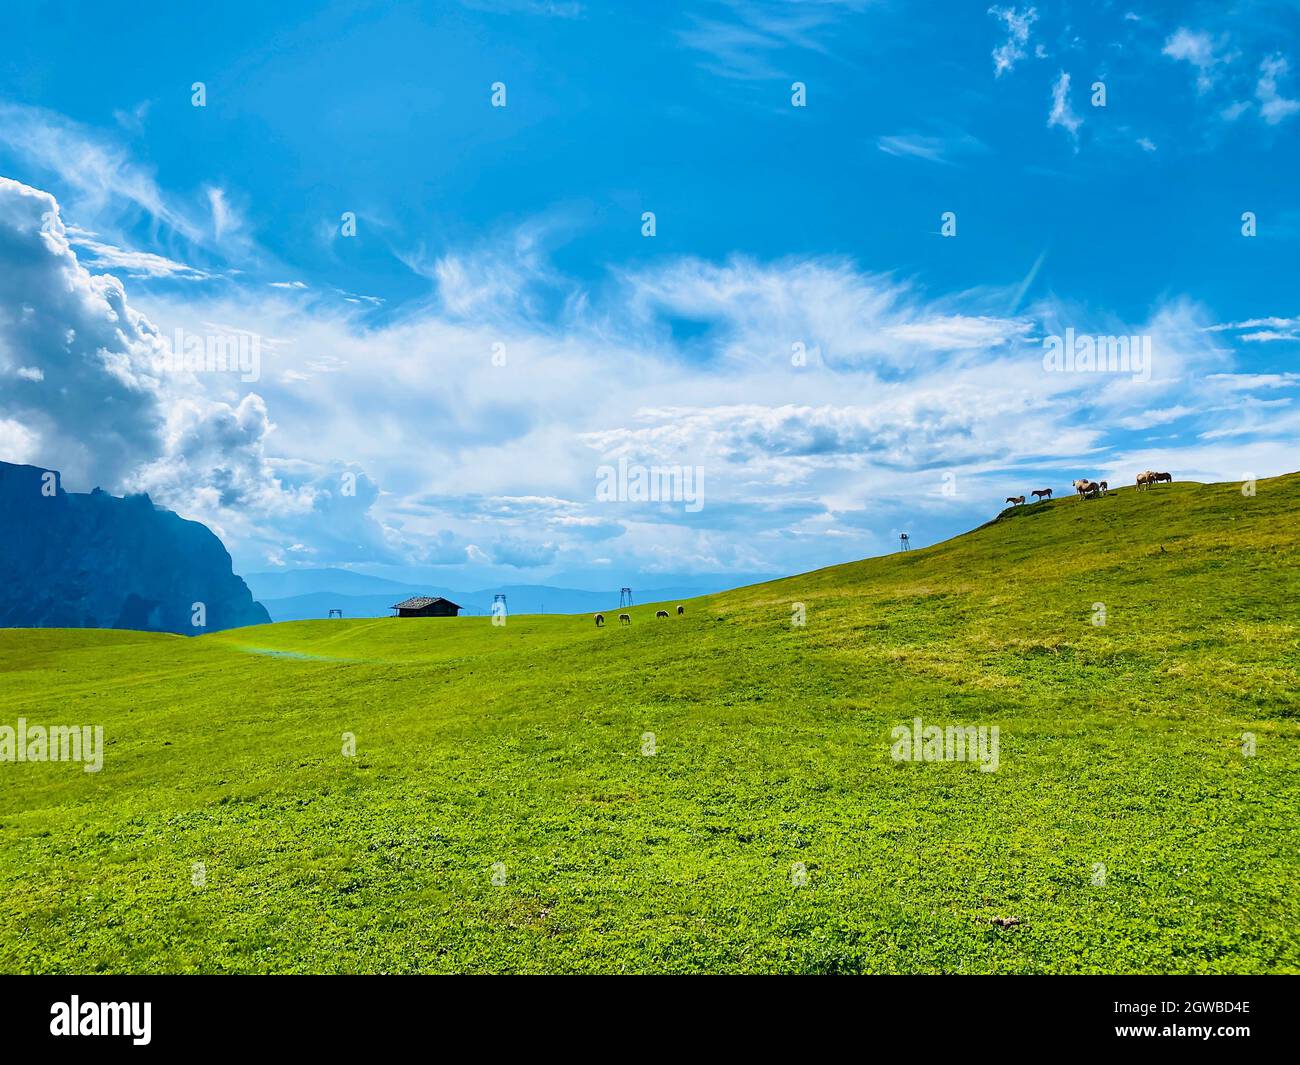 10 Windows XP HD Wallpapers and Backgrounds